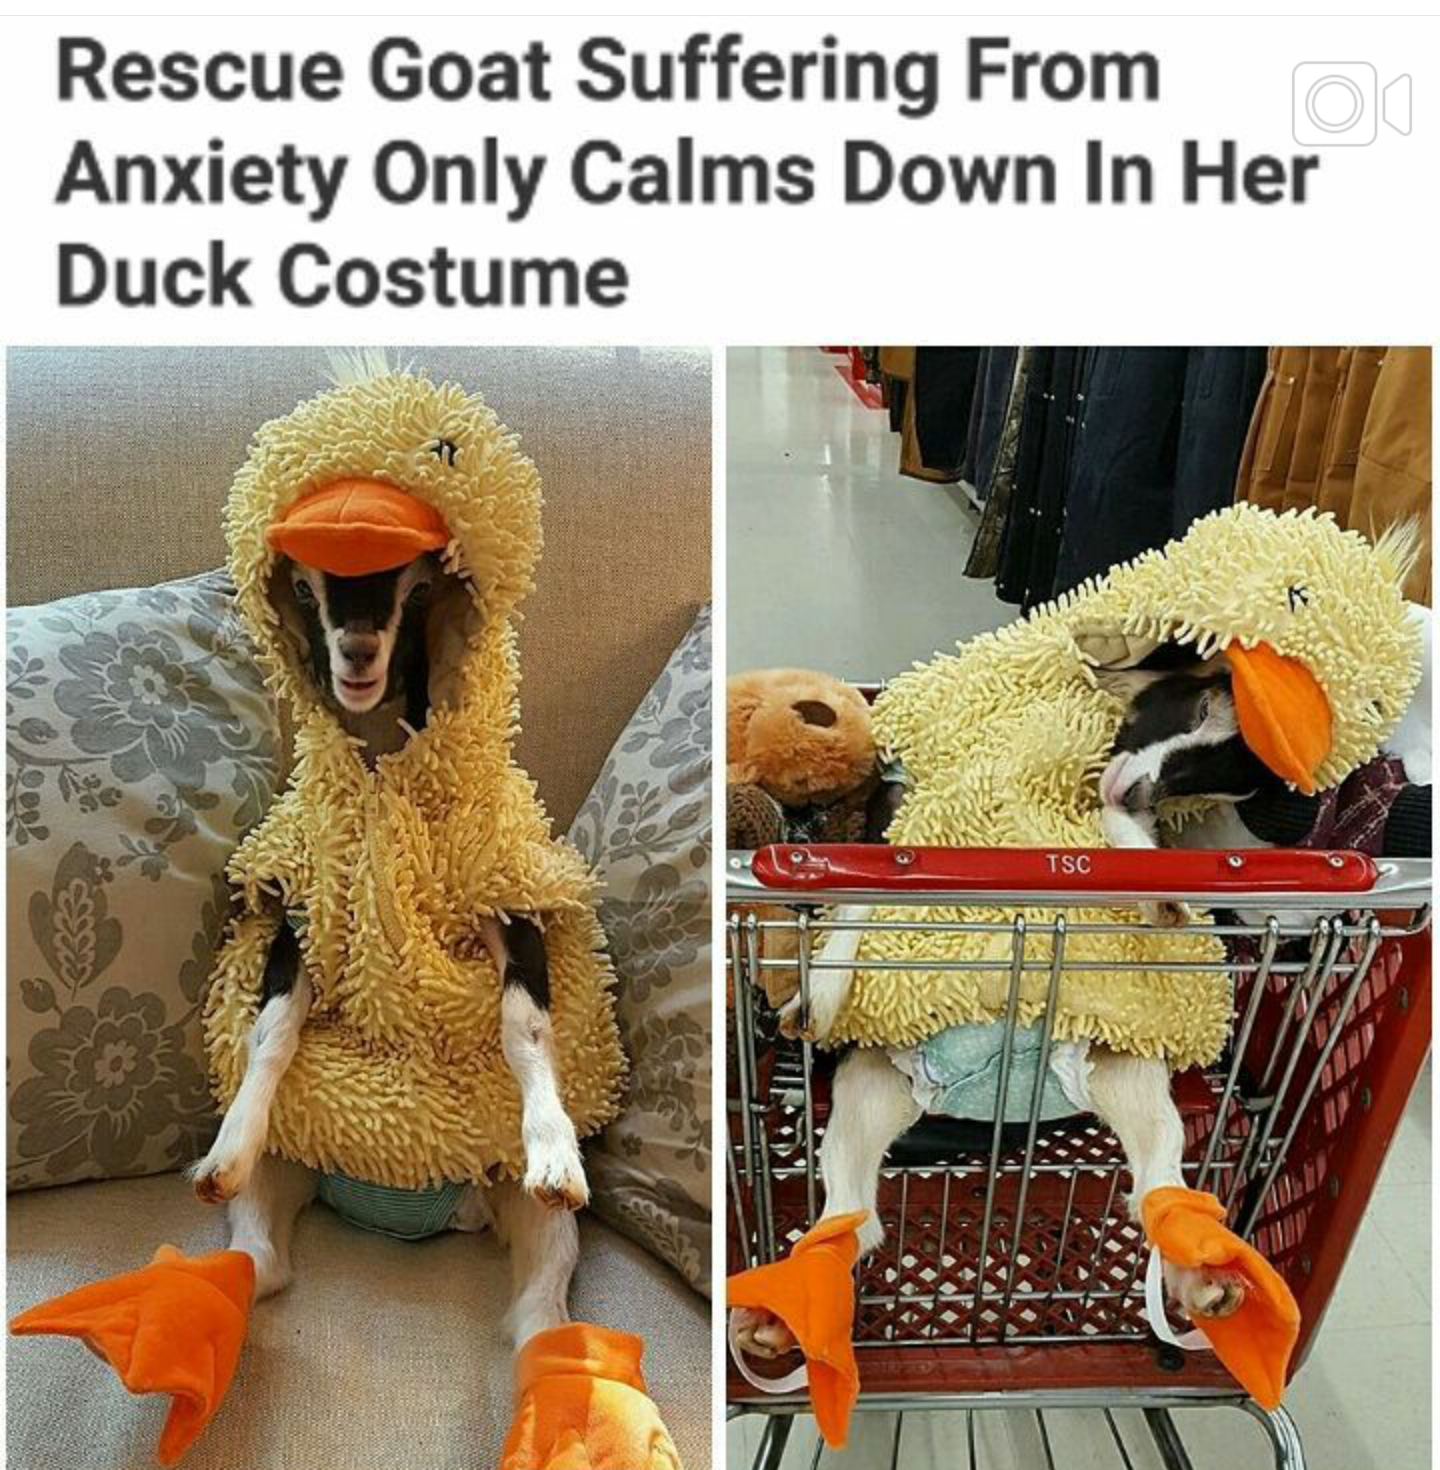 goat wearing duck costume - Rescue Goat Suffering from o Anxiety Only Calms Down In Her Duck Costume